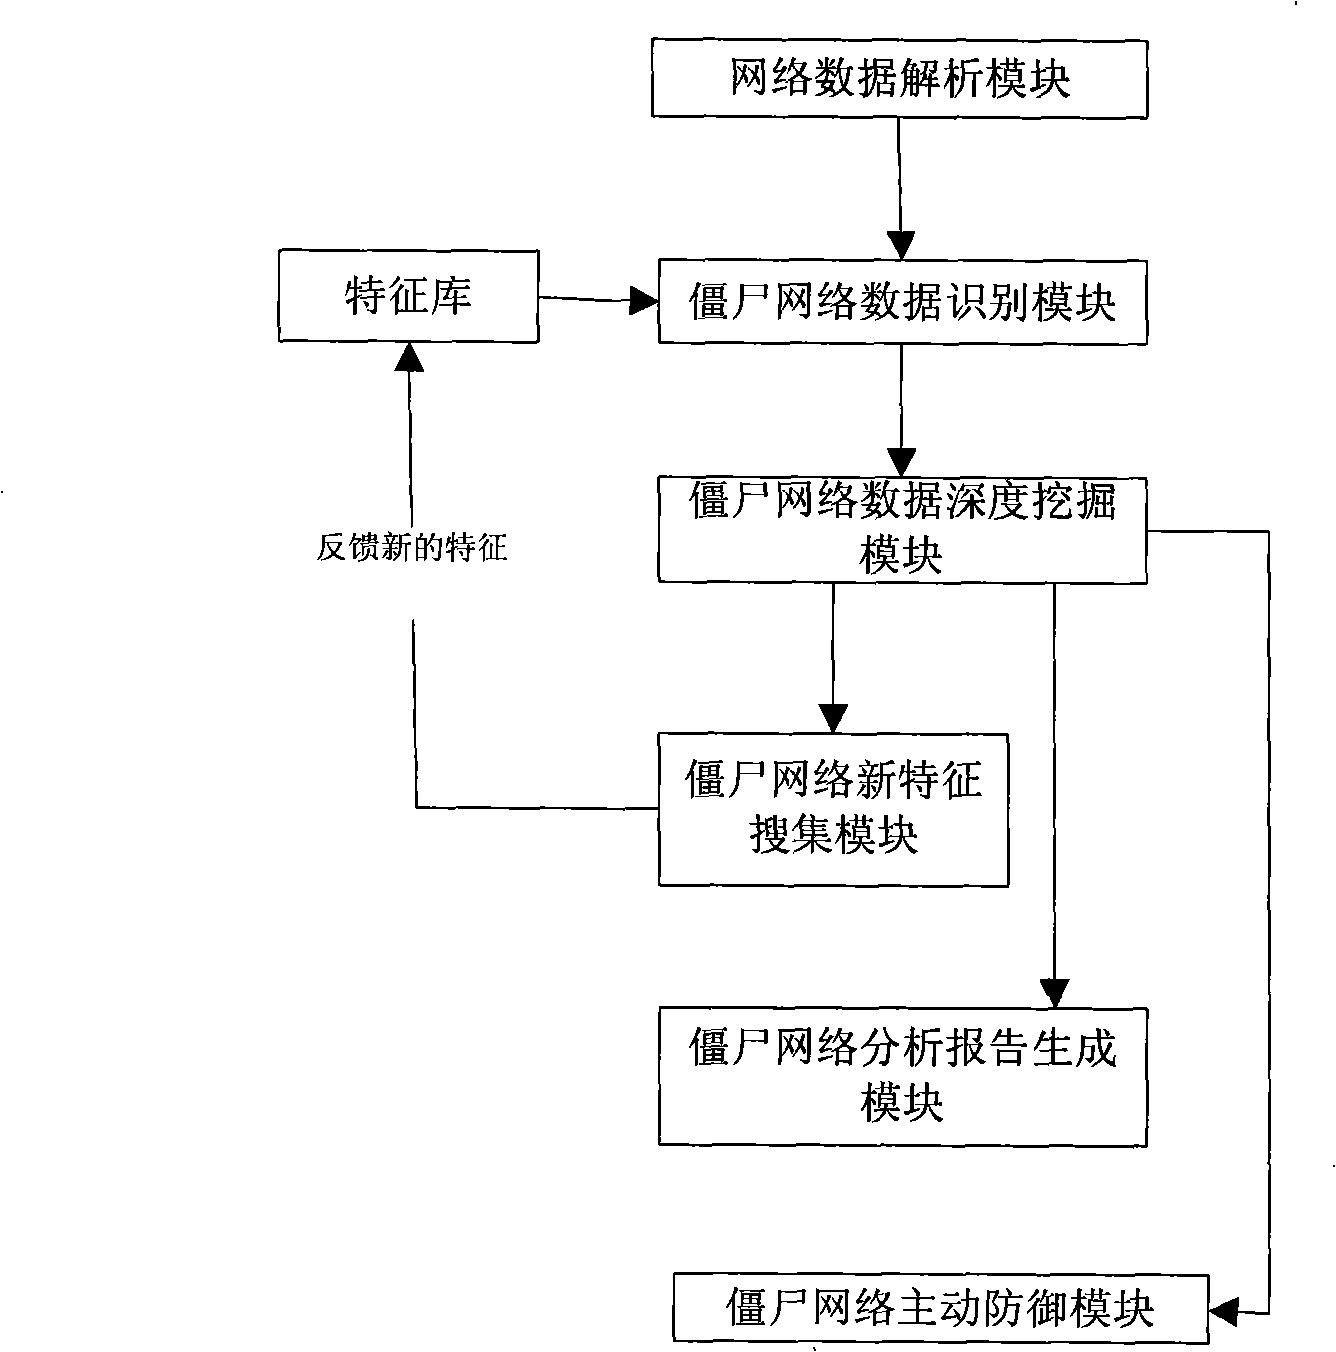 Method and system for detecting bot network